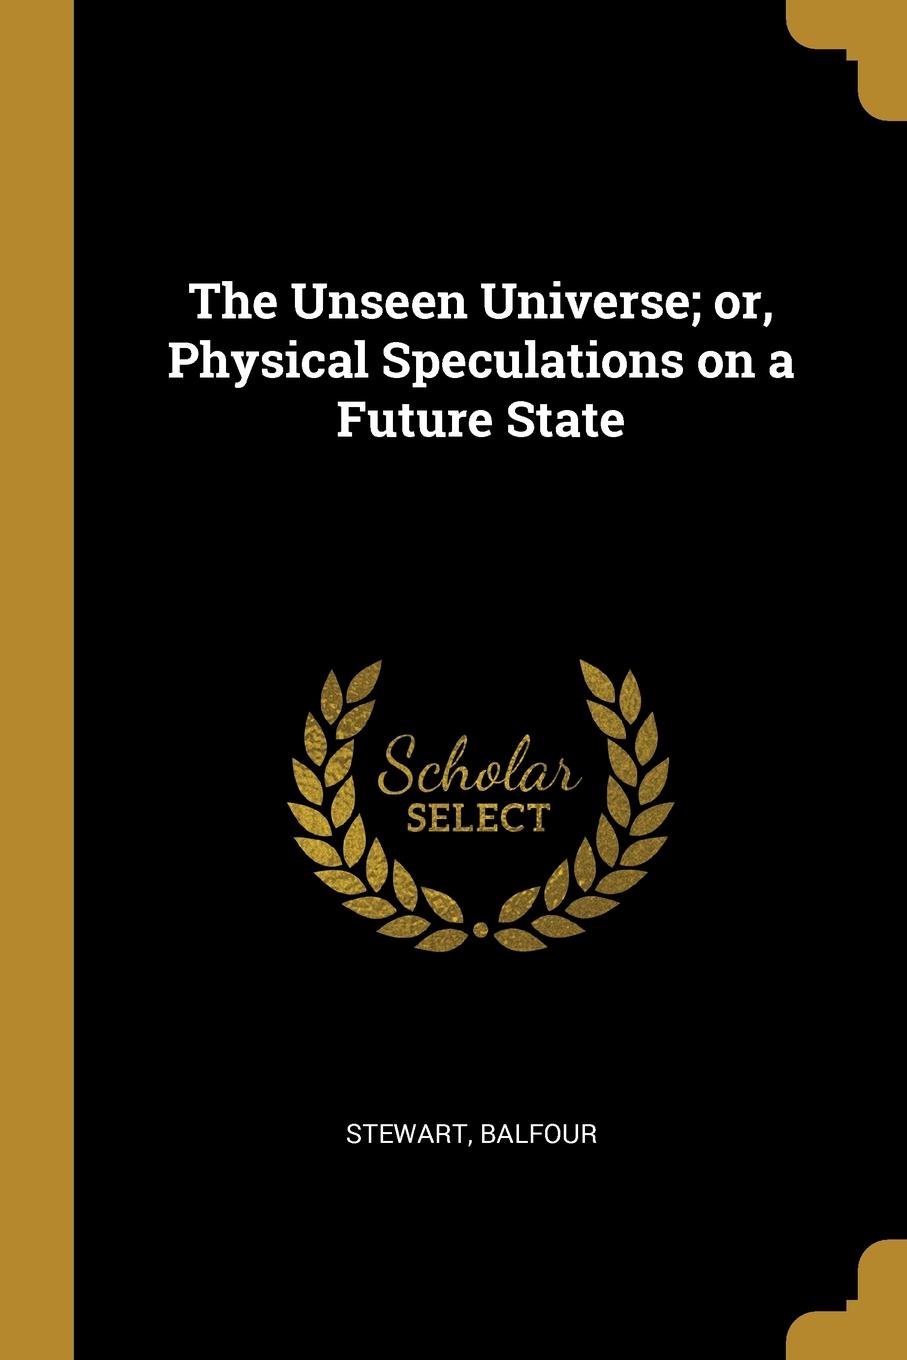 The Unseen Universe; or, Physical Speculations on a Future State